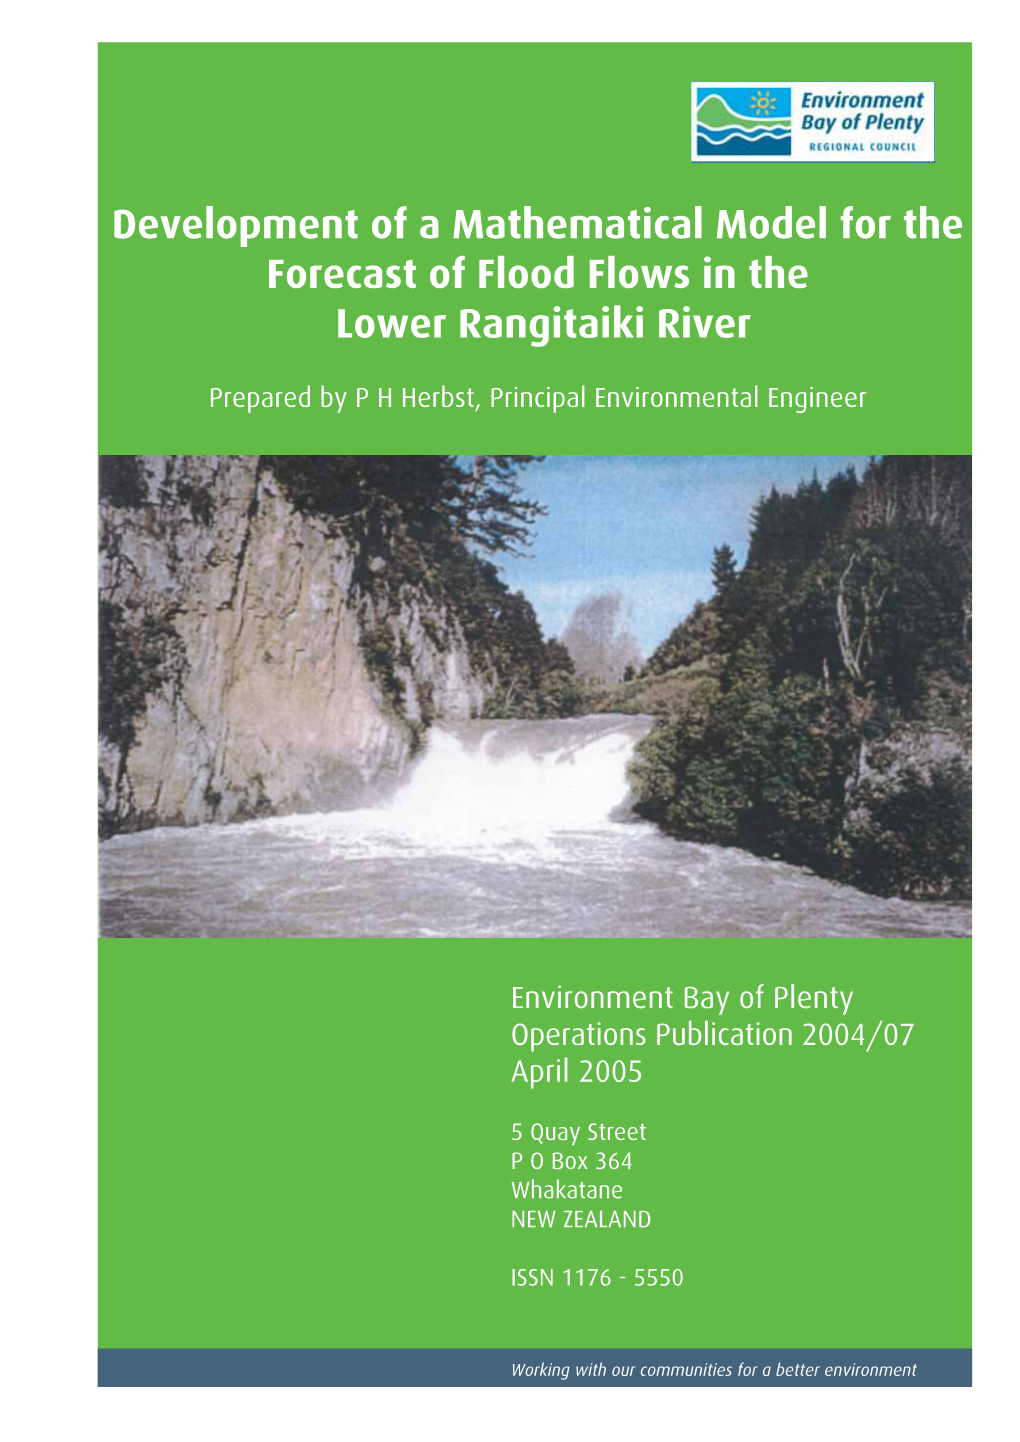 Development of a Mathematical Model for the Forecast of Flood Flows in the Lower Rangitaiki River